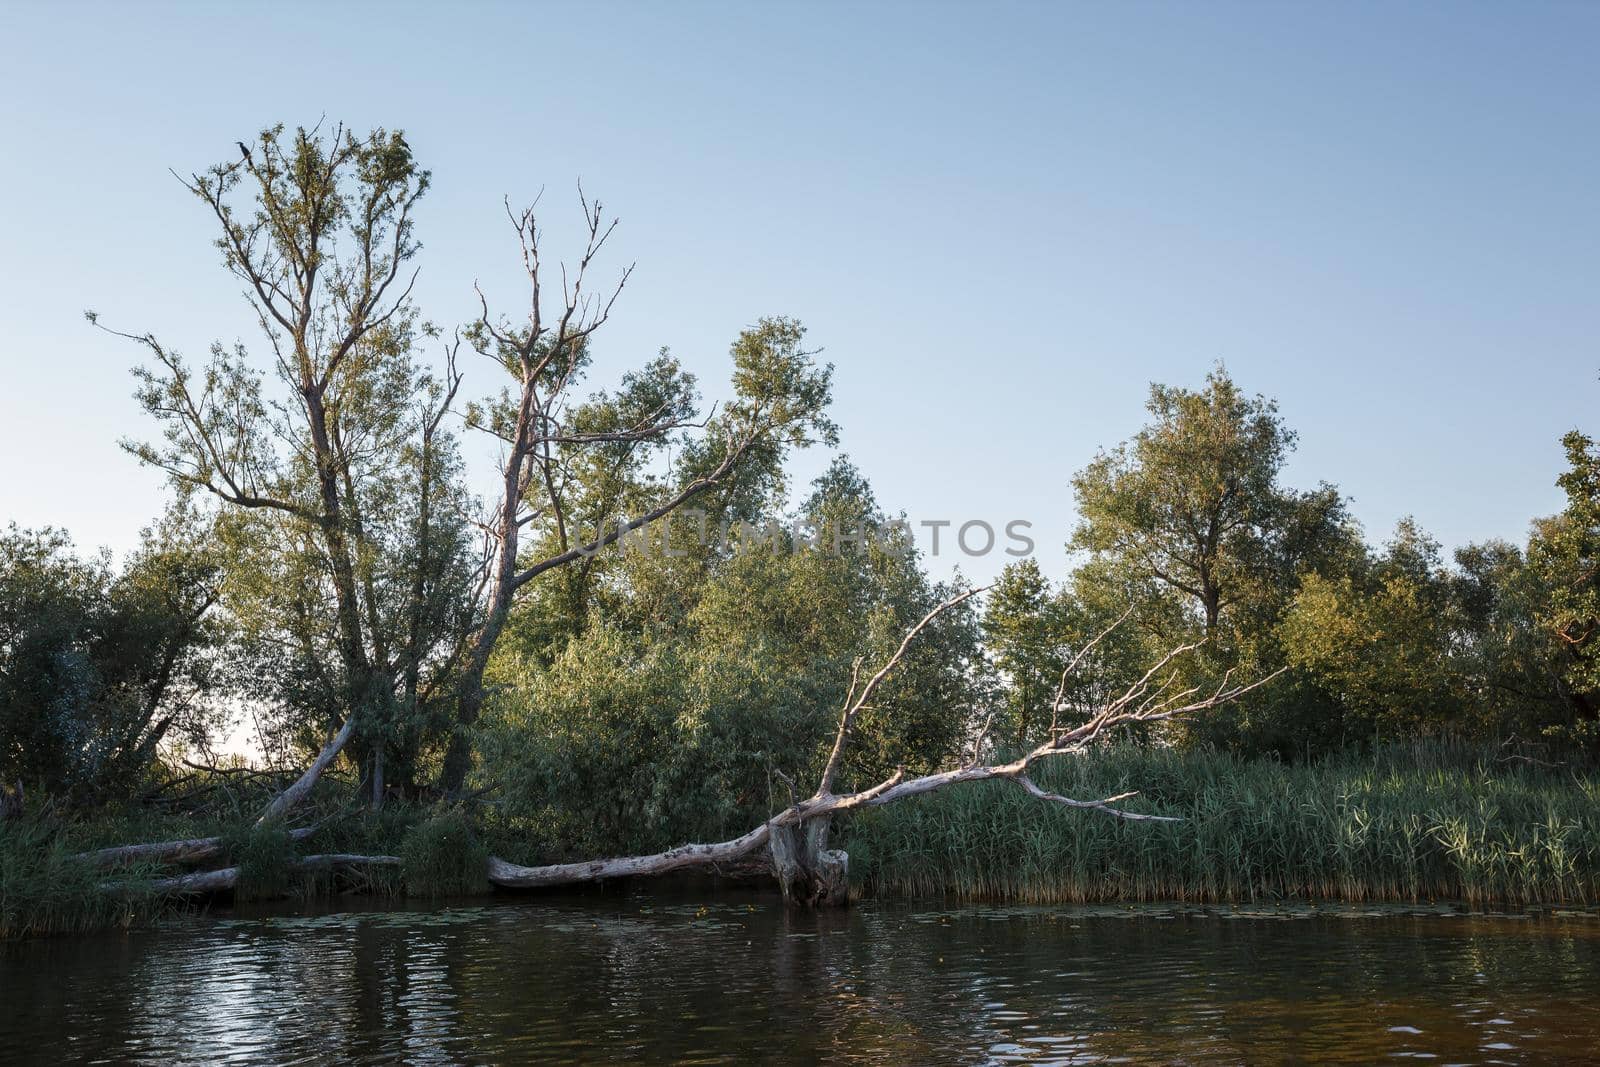 Landscape of a riverside with a fallen dry tree and one cormorant at the tree top. by Lincikas